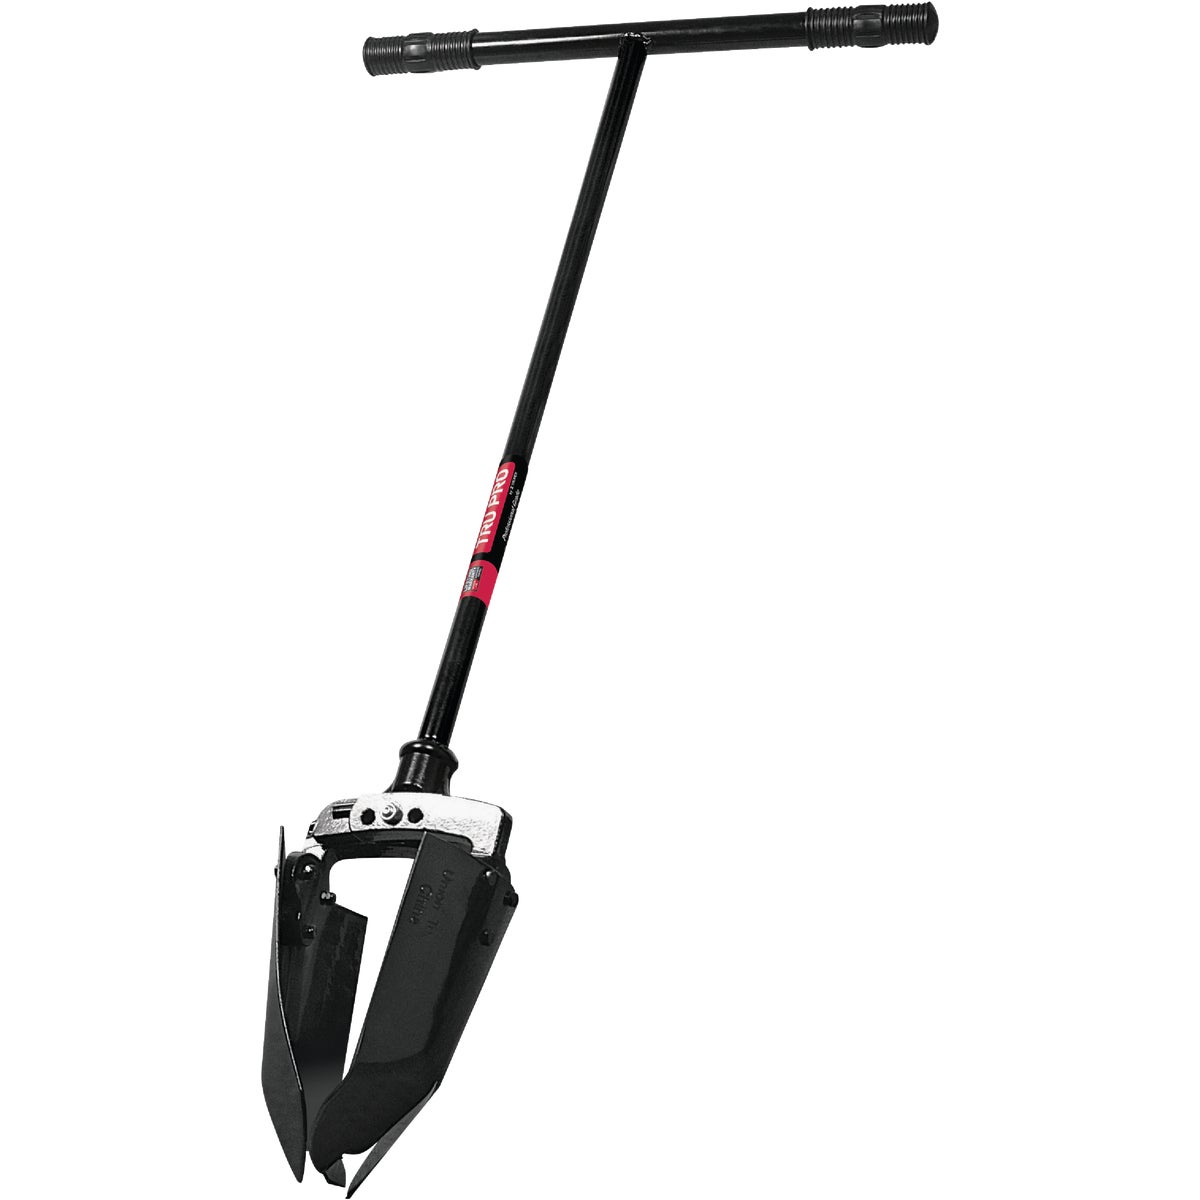 Item 702234, Tru Pro all steel construction auger with adjustable width. 33 In.